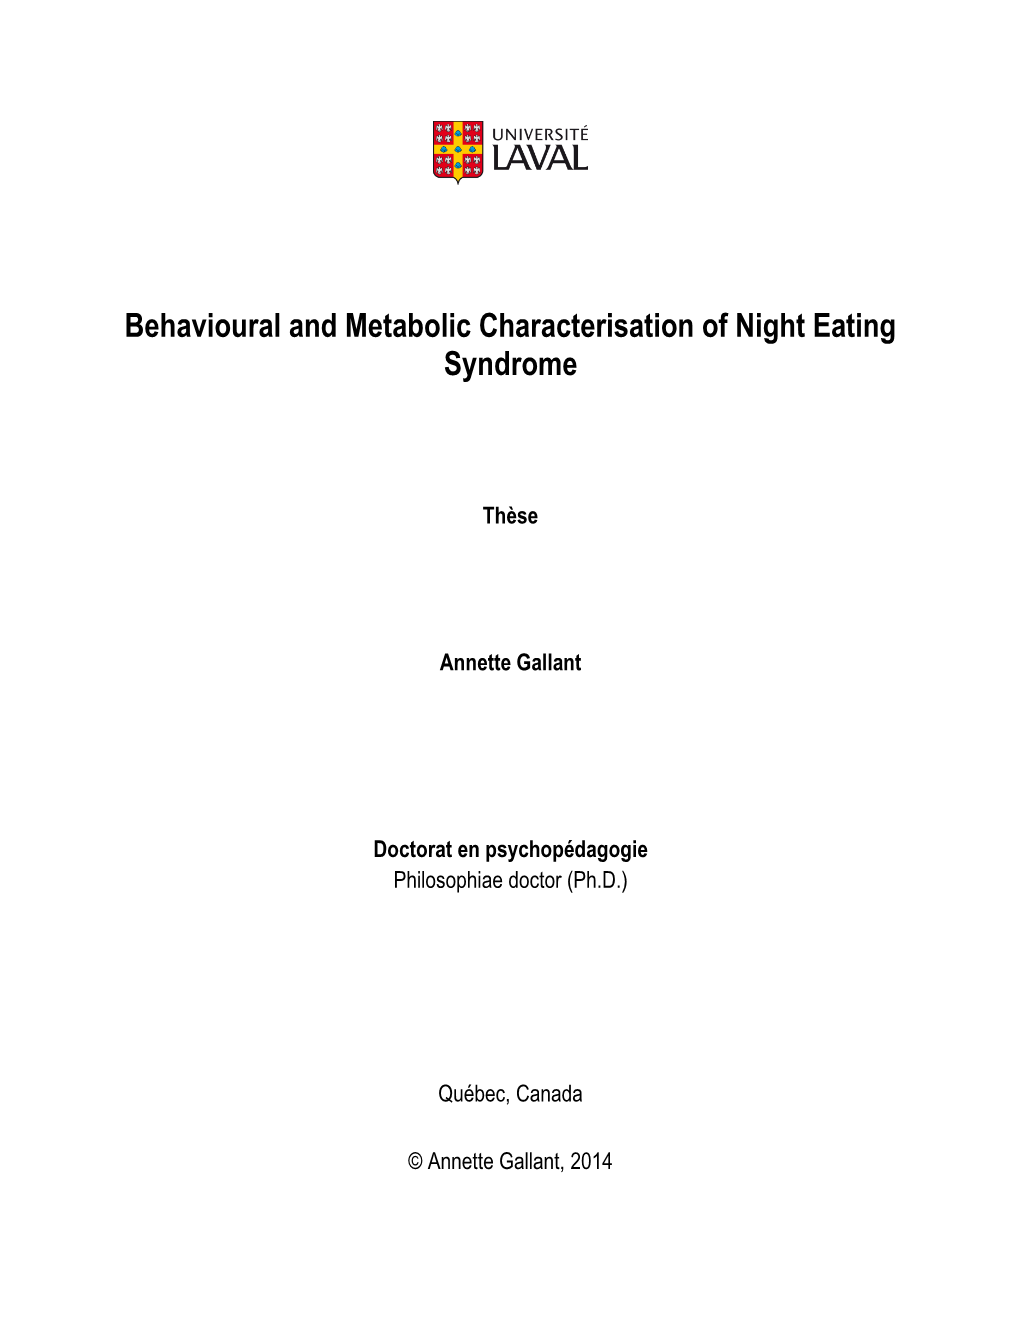 Behavioural and Metabolic Characterisation of Night Eating Syndrome